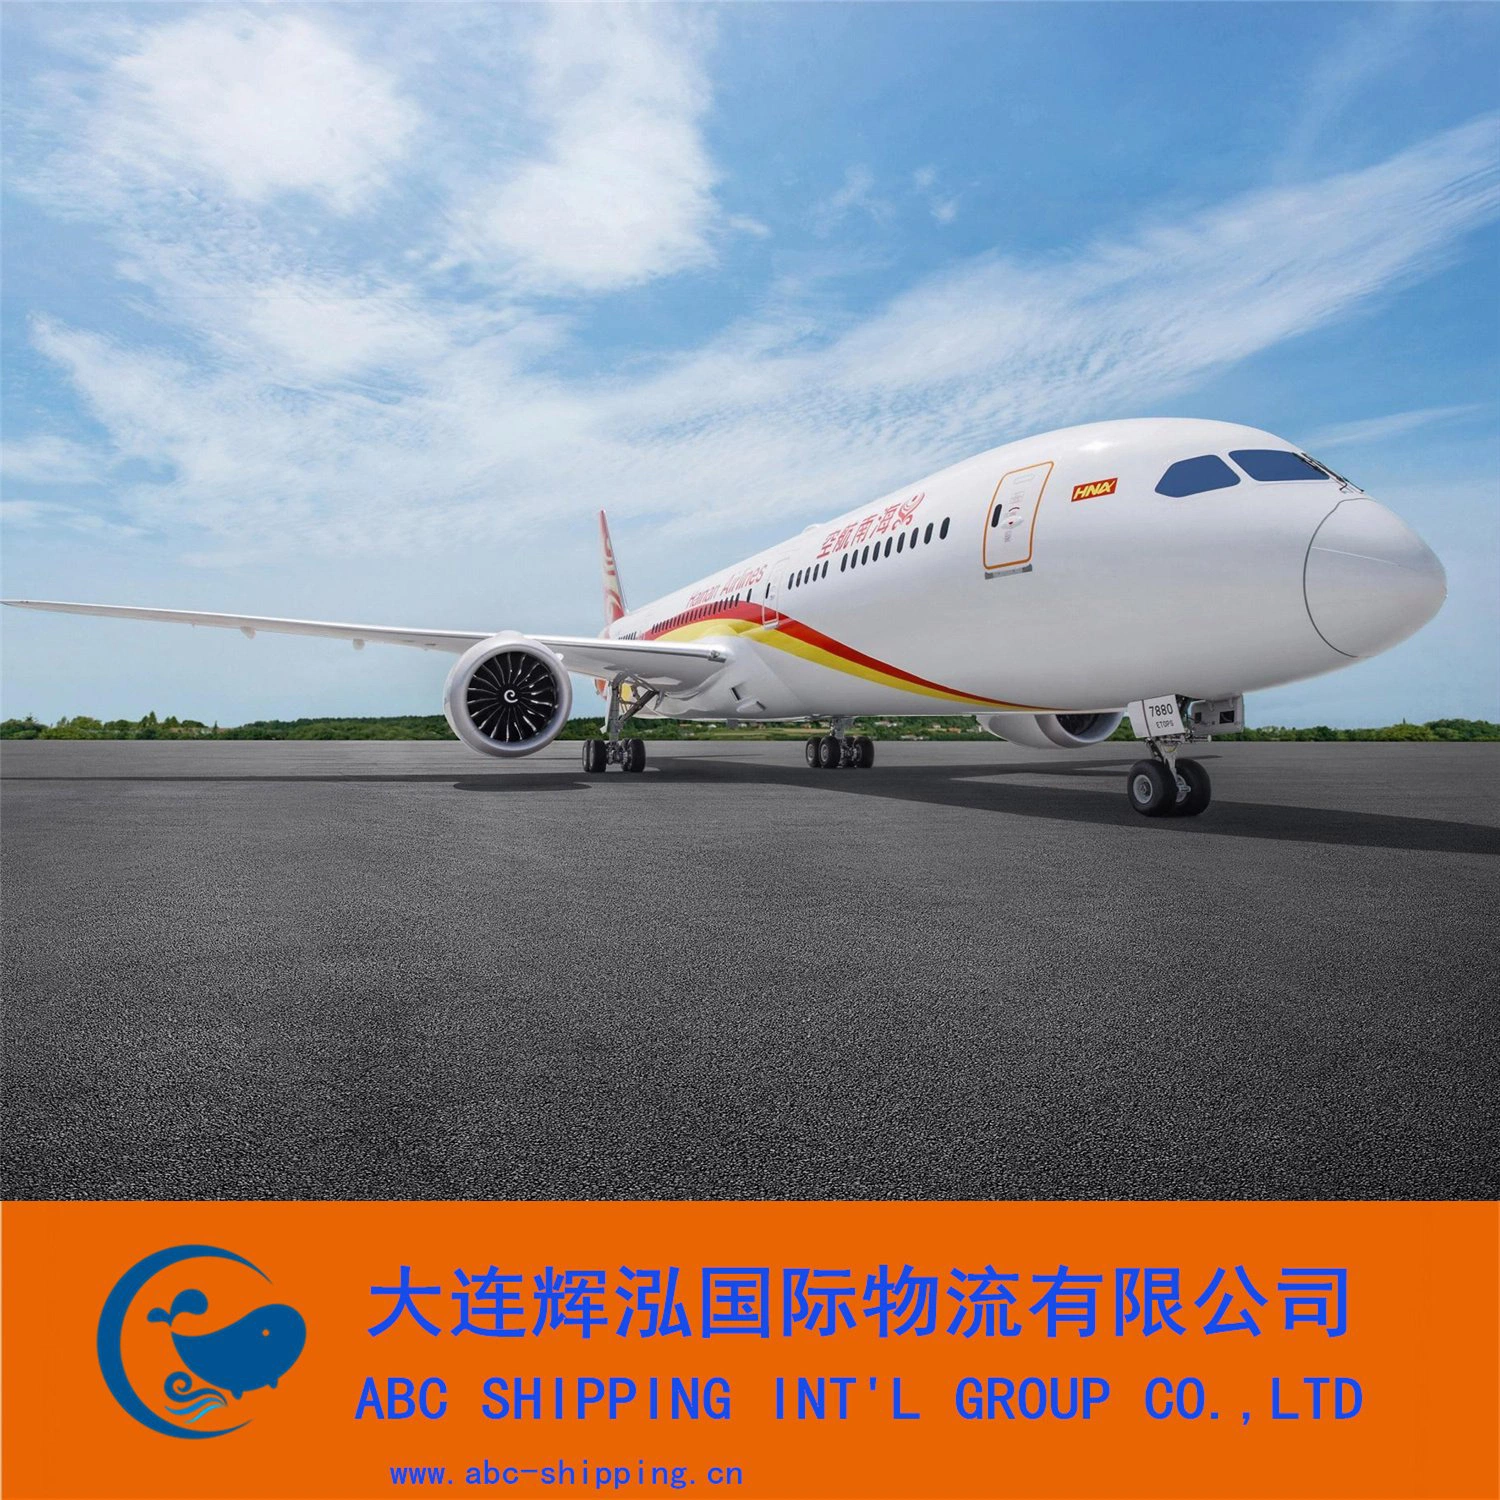 The Best Air Shipping Logistics Company in China